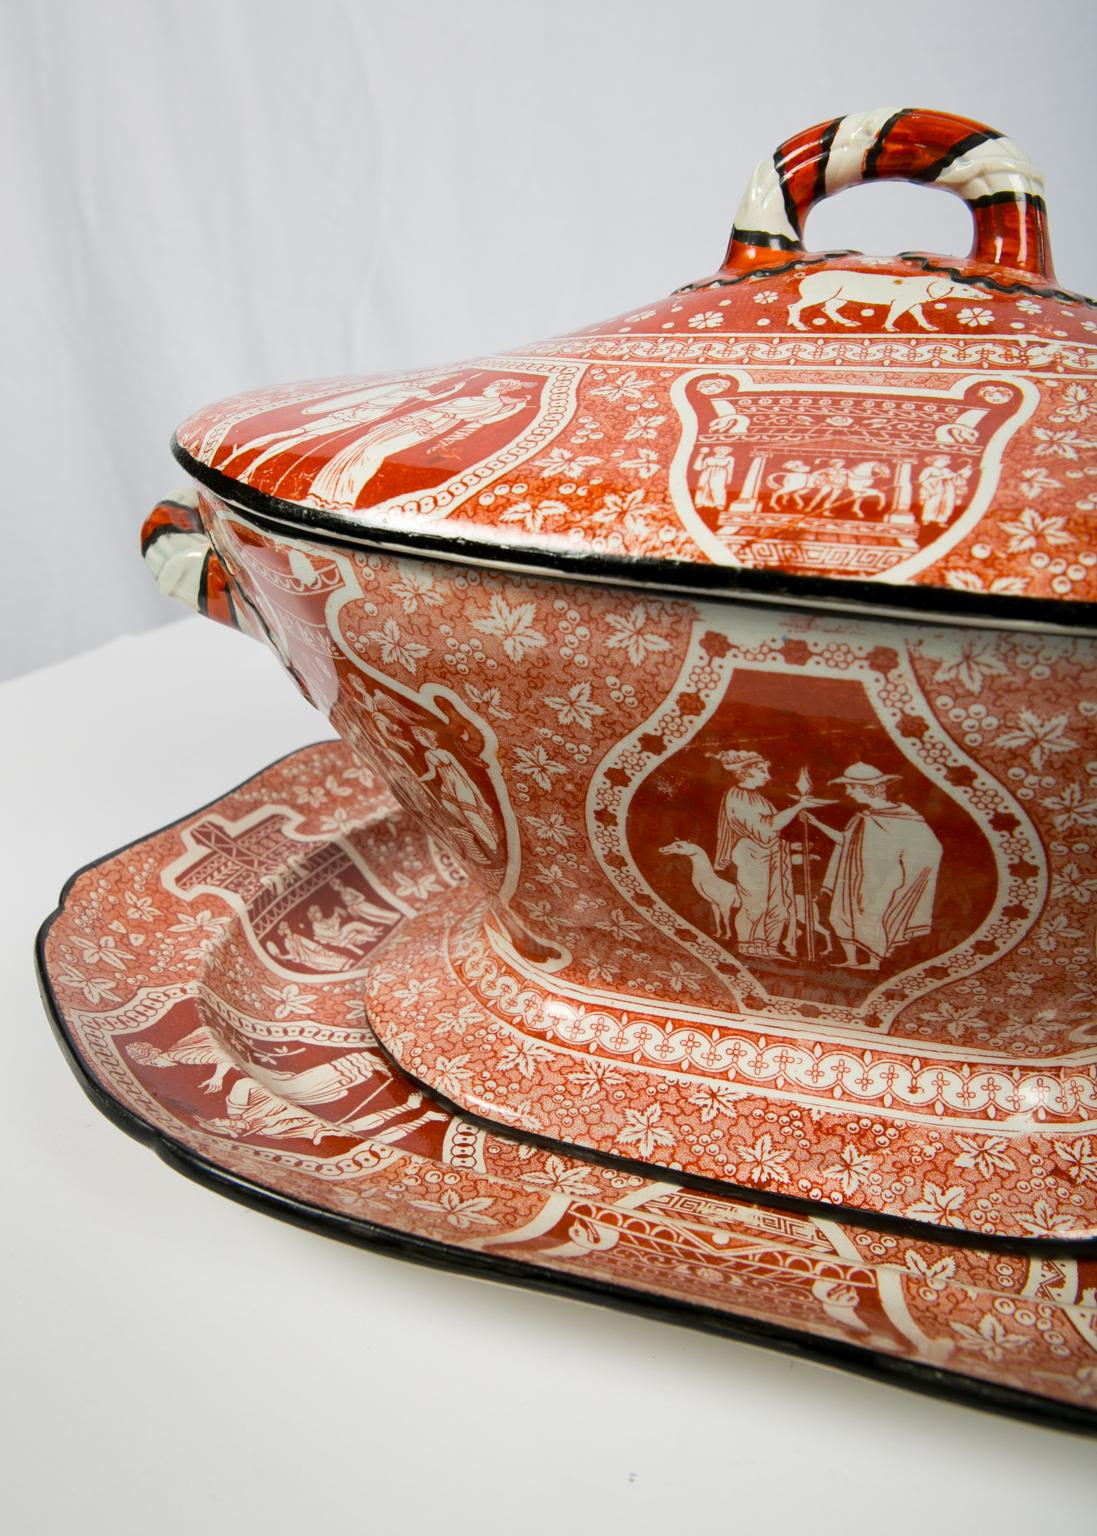 WHY WE LOVE IT: If anyone has more of this please call.
We are pleased to offer this antique red Greek ware soup tureen decorated with classical figures. The color is just glorious, and we are thrilled to be offering this tureen. In the 57 years